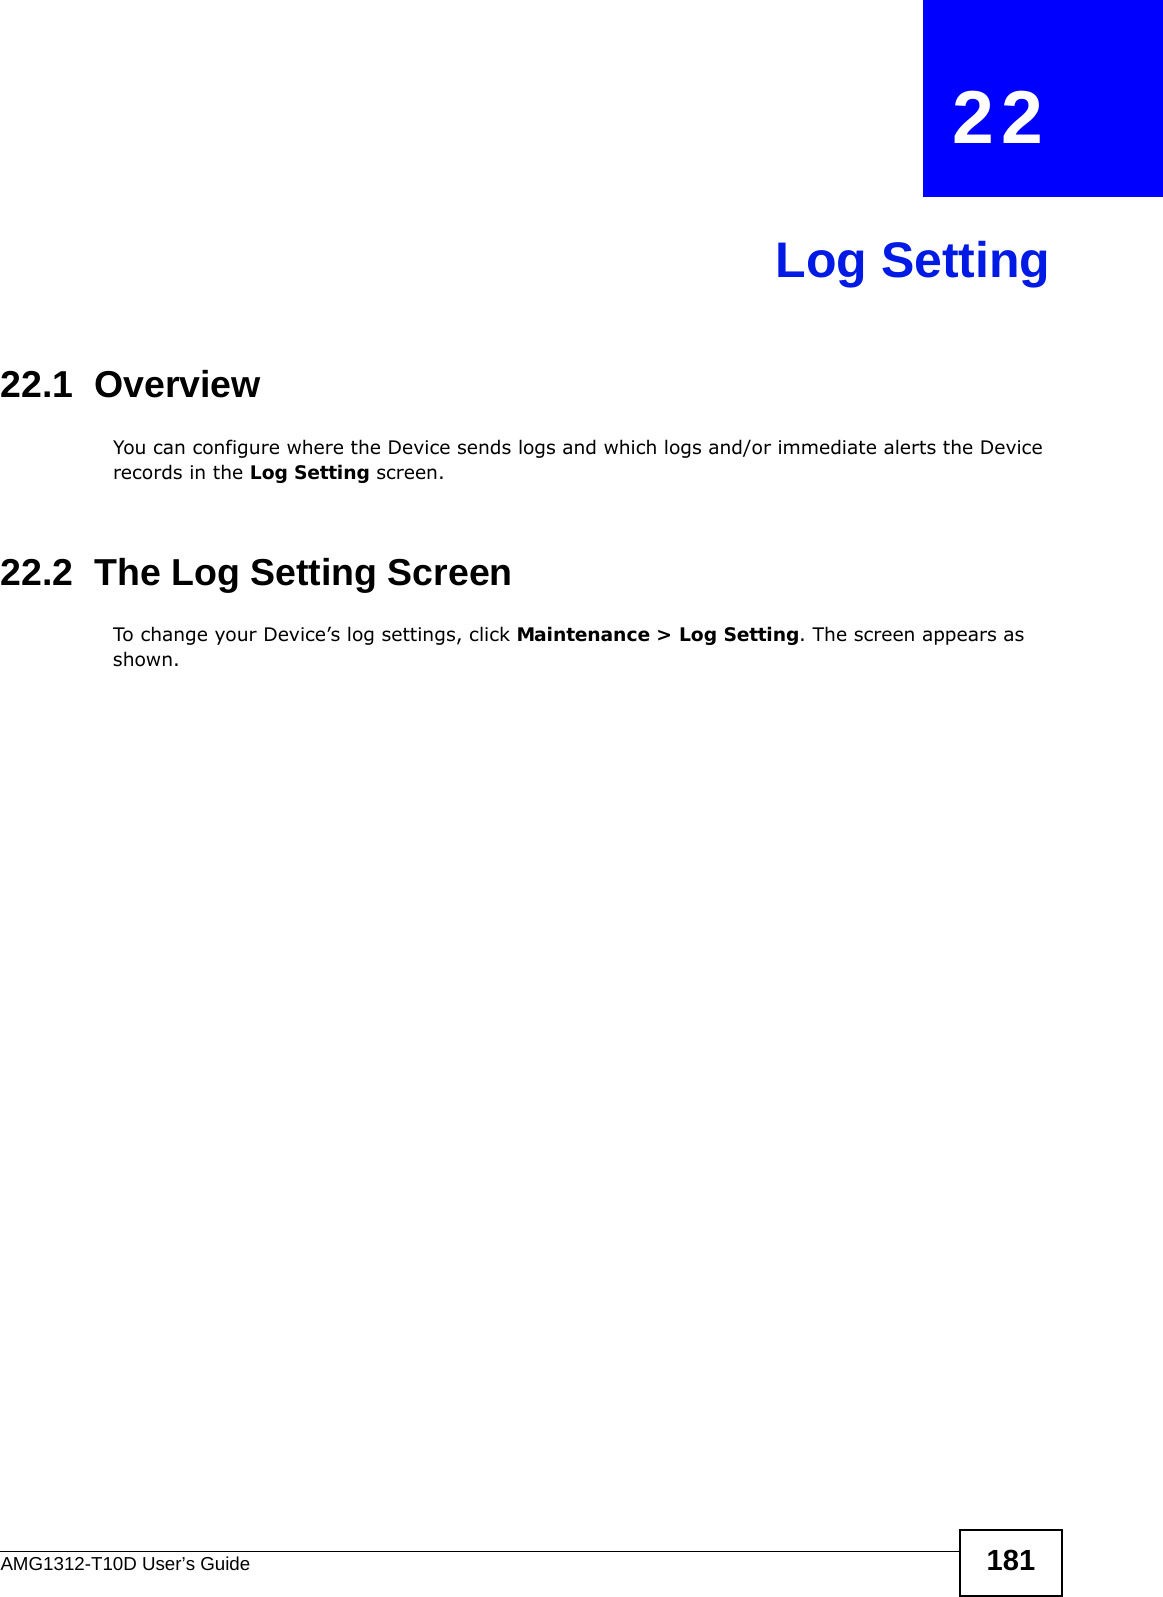 AMG1312-T10D User’s Guide 181CHAPTER   22Log Setting22.1  Overview You can configure where the Device sends logs and which logs and/or immediate alerts the Device records in the Log Setting screen.22.2  The Log Setting ScreenTo change your Device’s log settings, click Maintenance &gt; Log Setting. The screen appears as shown.